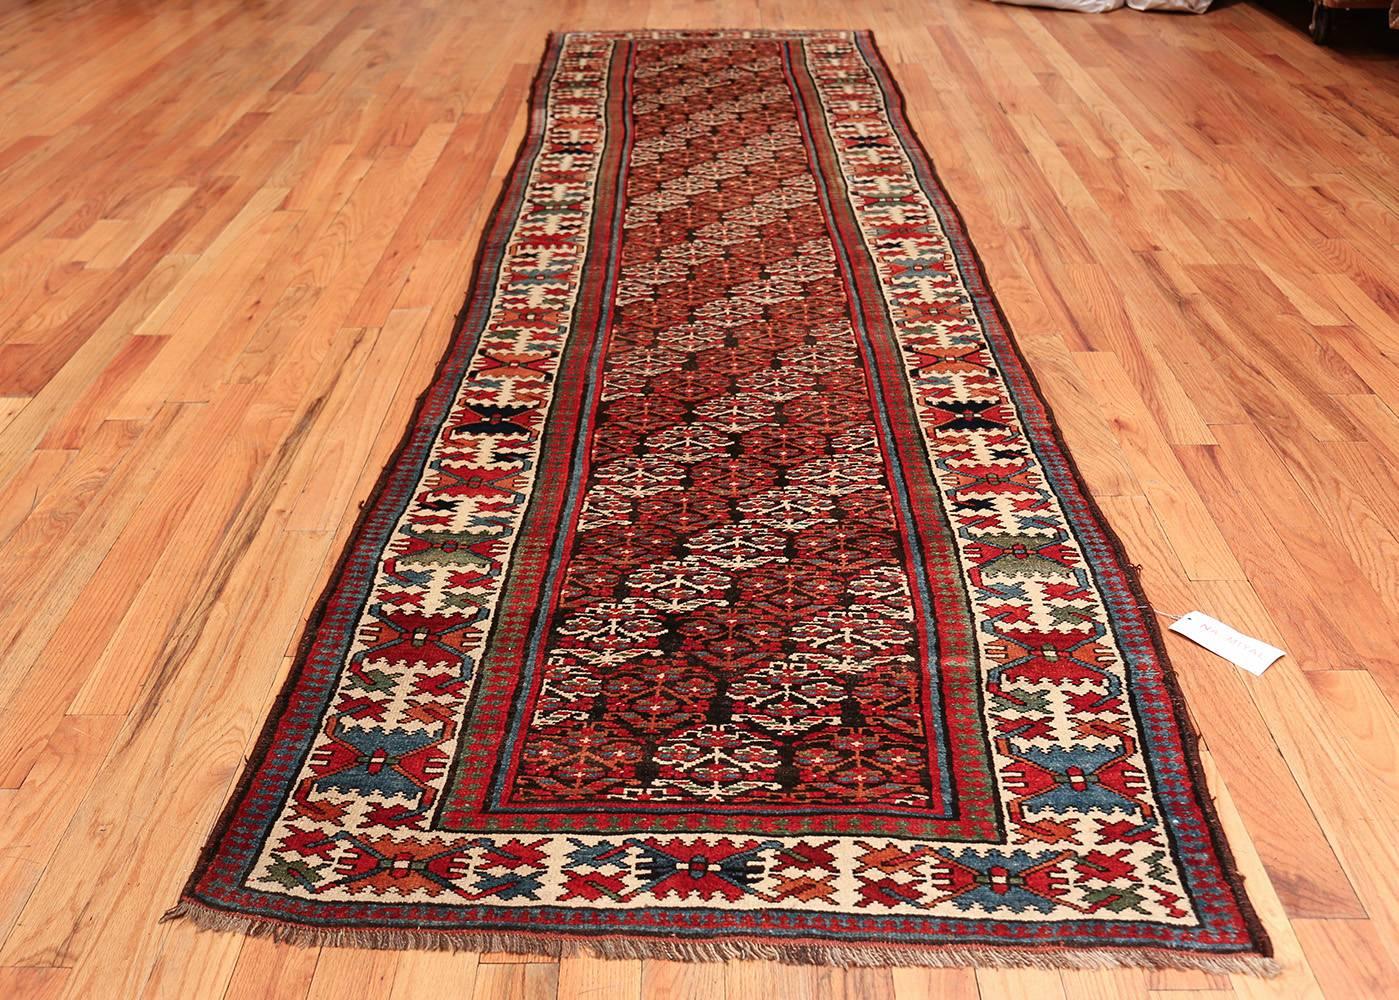 Antique Tribal Design Northwest Persian Runner Rug, Country of Origin: Persia, Circa Date: Late 19th Century. Size: 3 ft 7 in x 13 ft 5 in (1.09 m x 4.09 m).